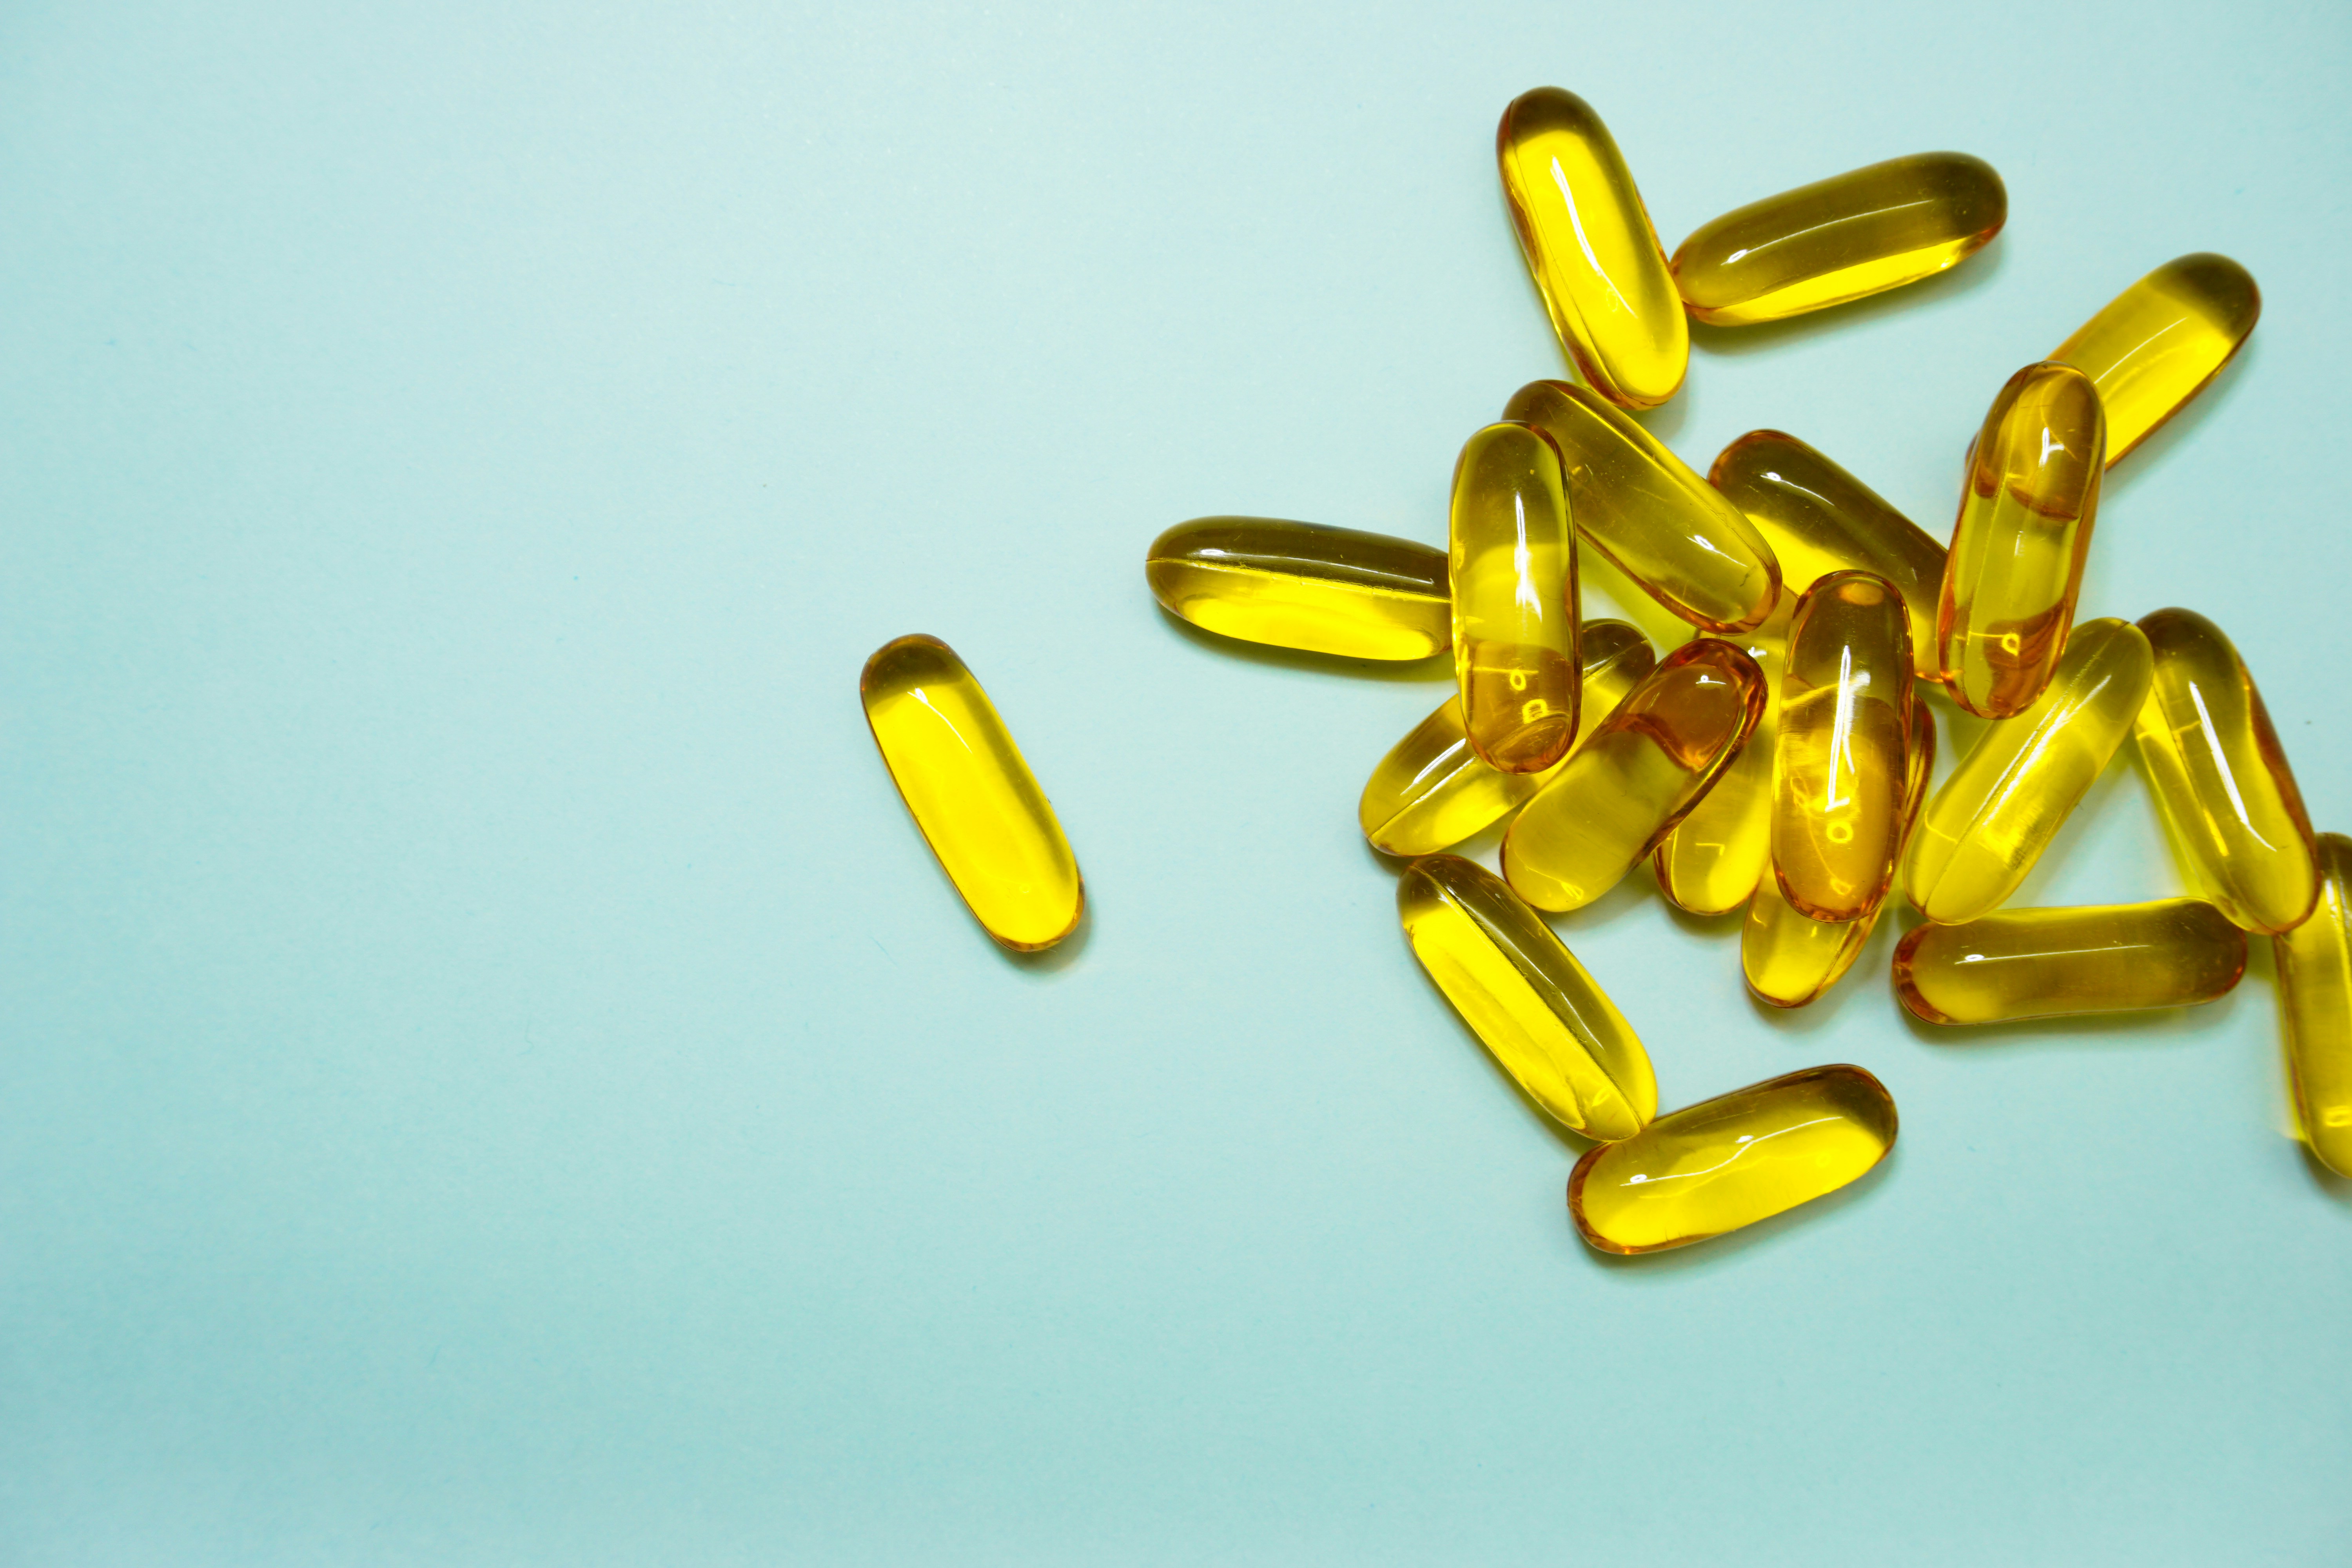 Vitamin D Hoax or a Real Supplemental Need?